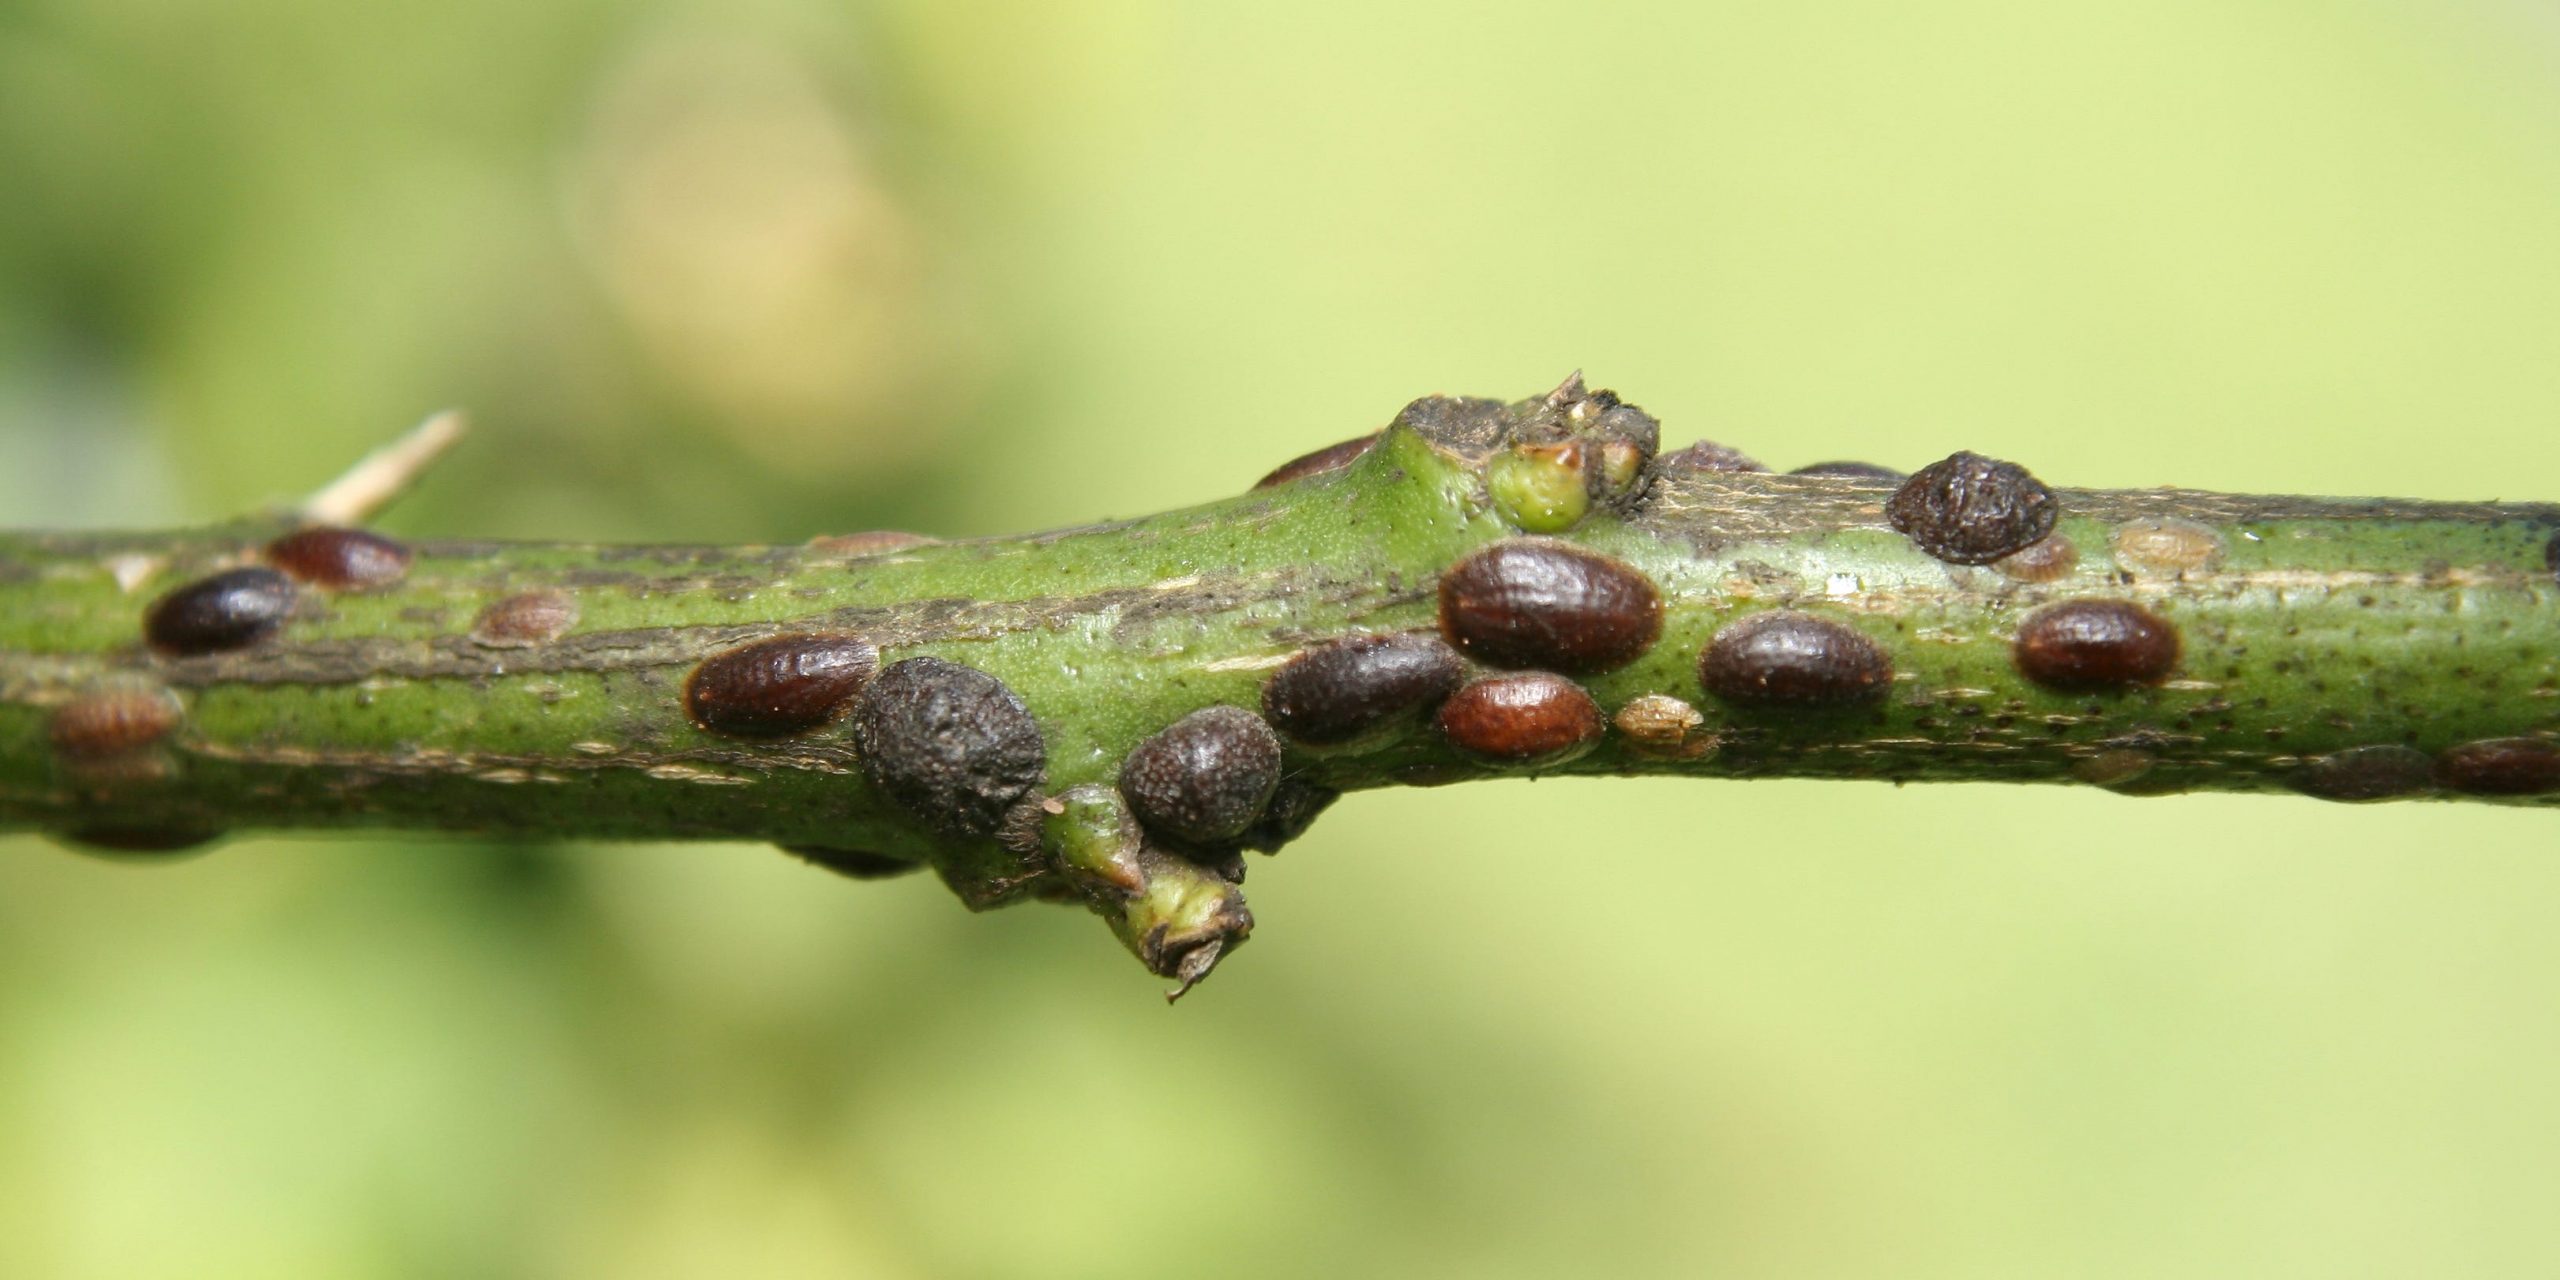 A stem of a plant infested with scale insects